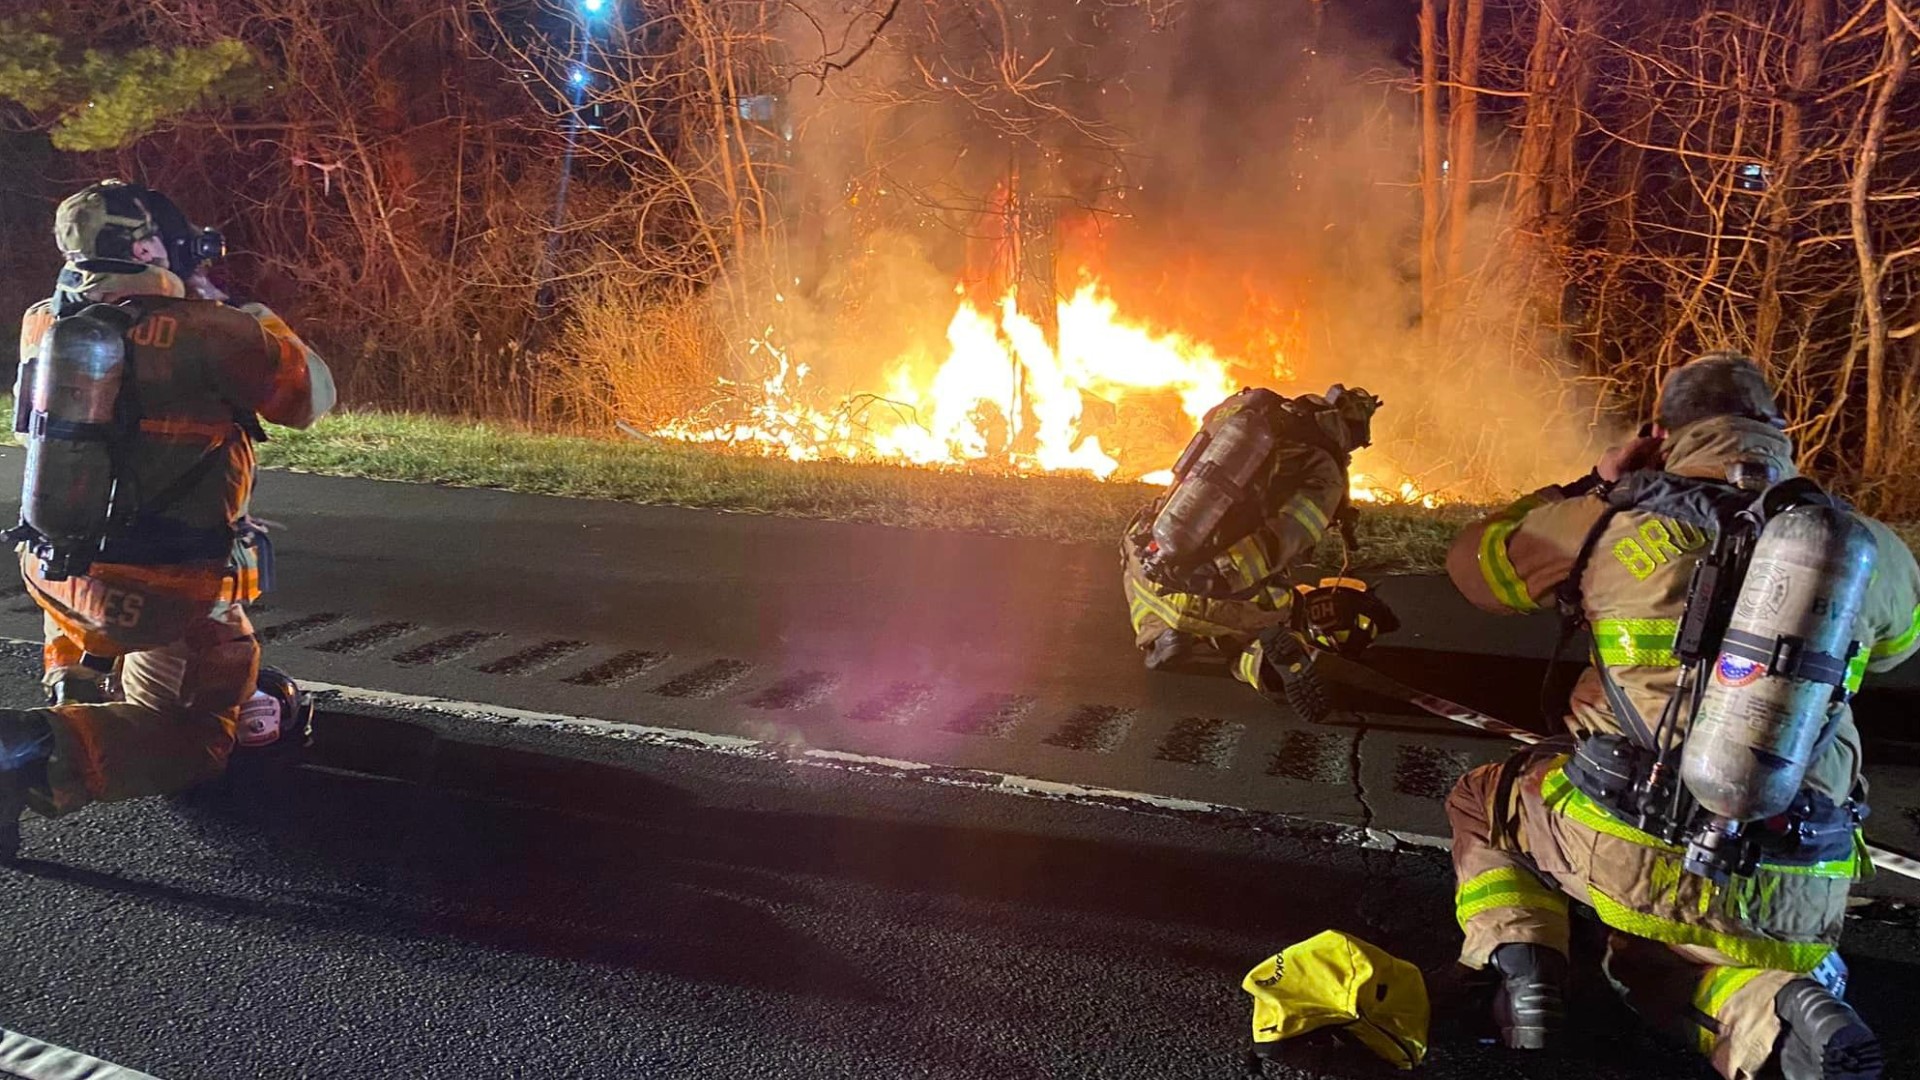 A New York firefighter's quick thinking helped save a Brookfield woman from a burning vehicle after a crash early Saturday morning, officials said.